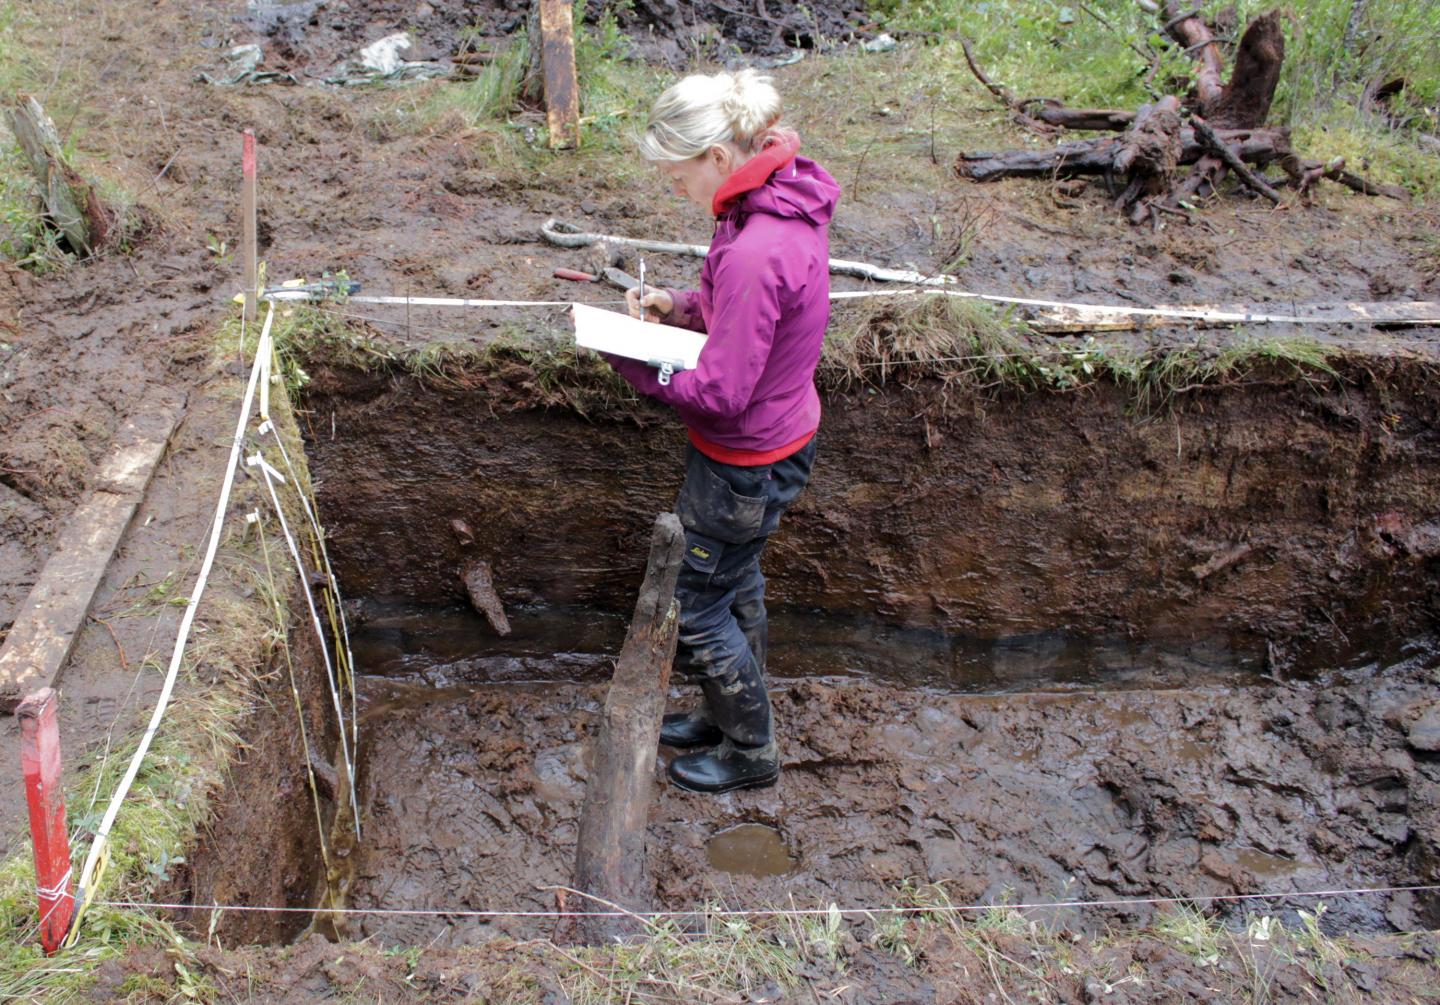 Wetland Archaeological Excavations in Operation in Finland